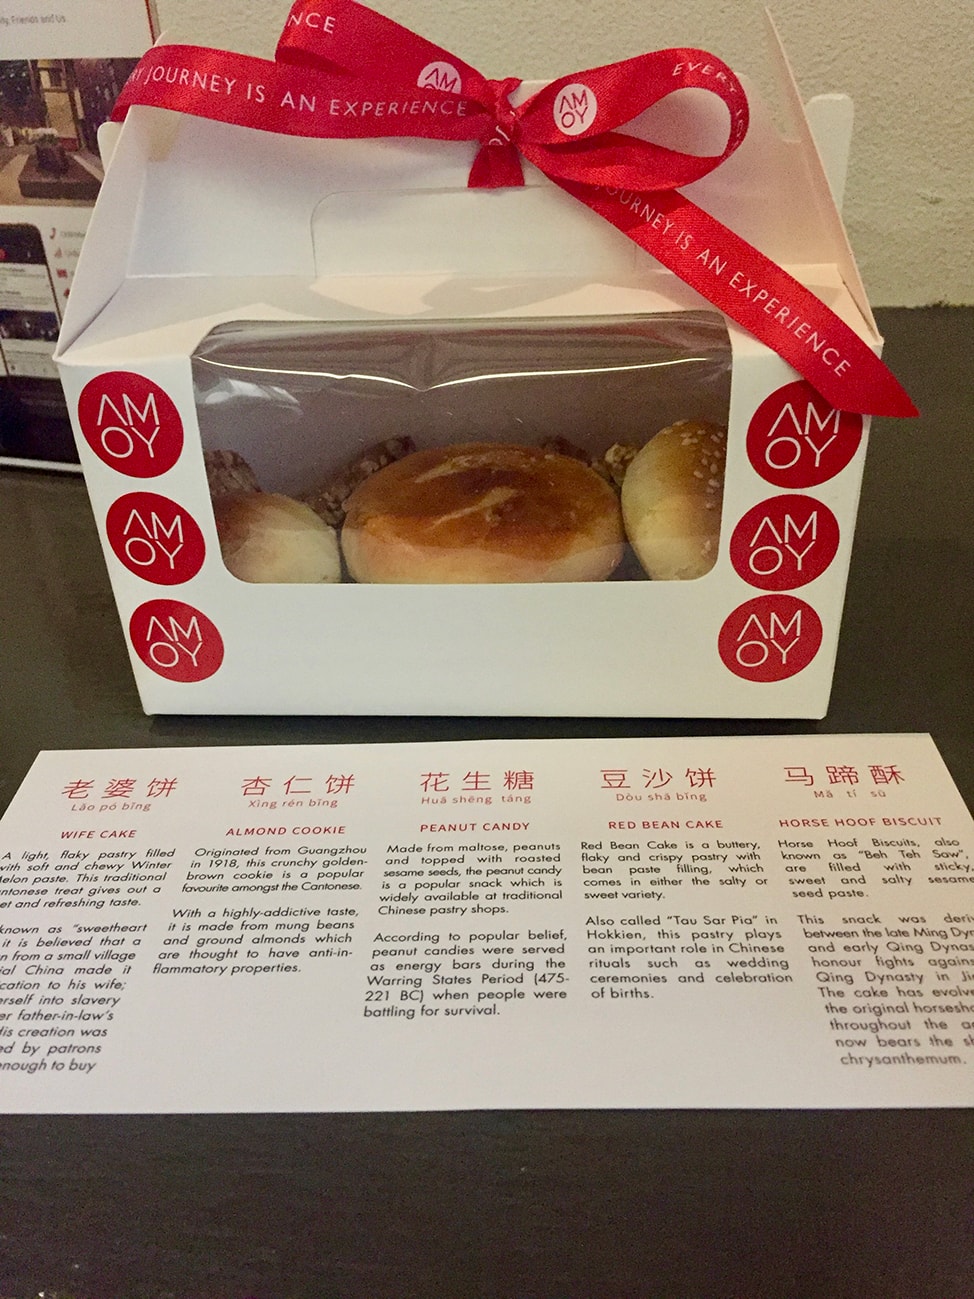 Fresh Singaporean pastries provided for guests at Amoy Hotel